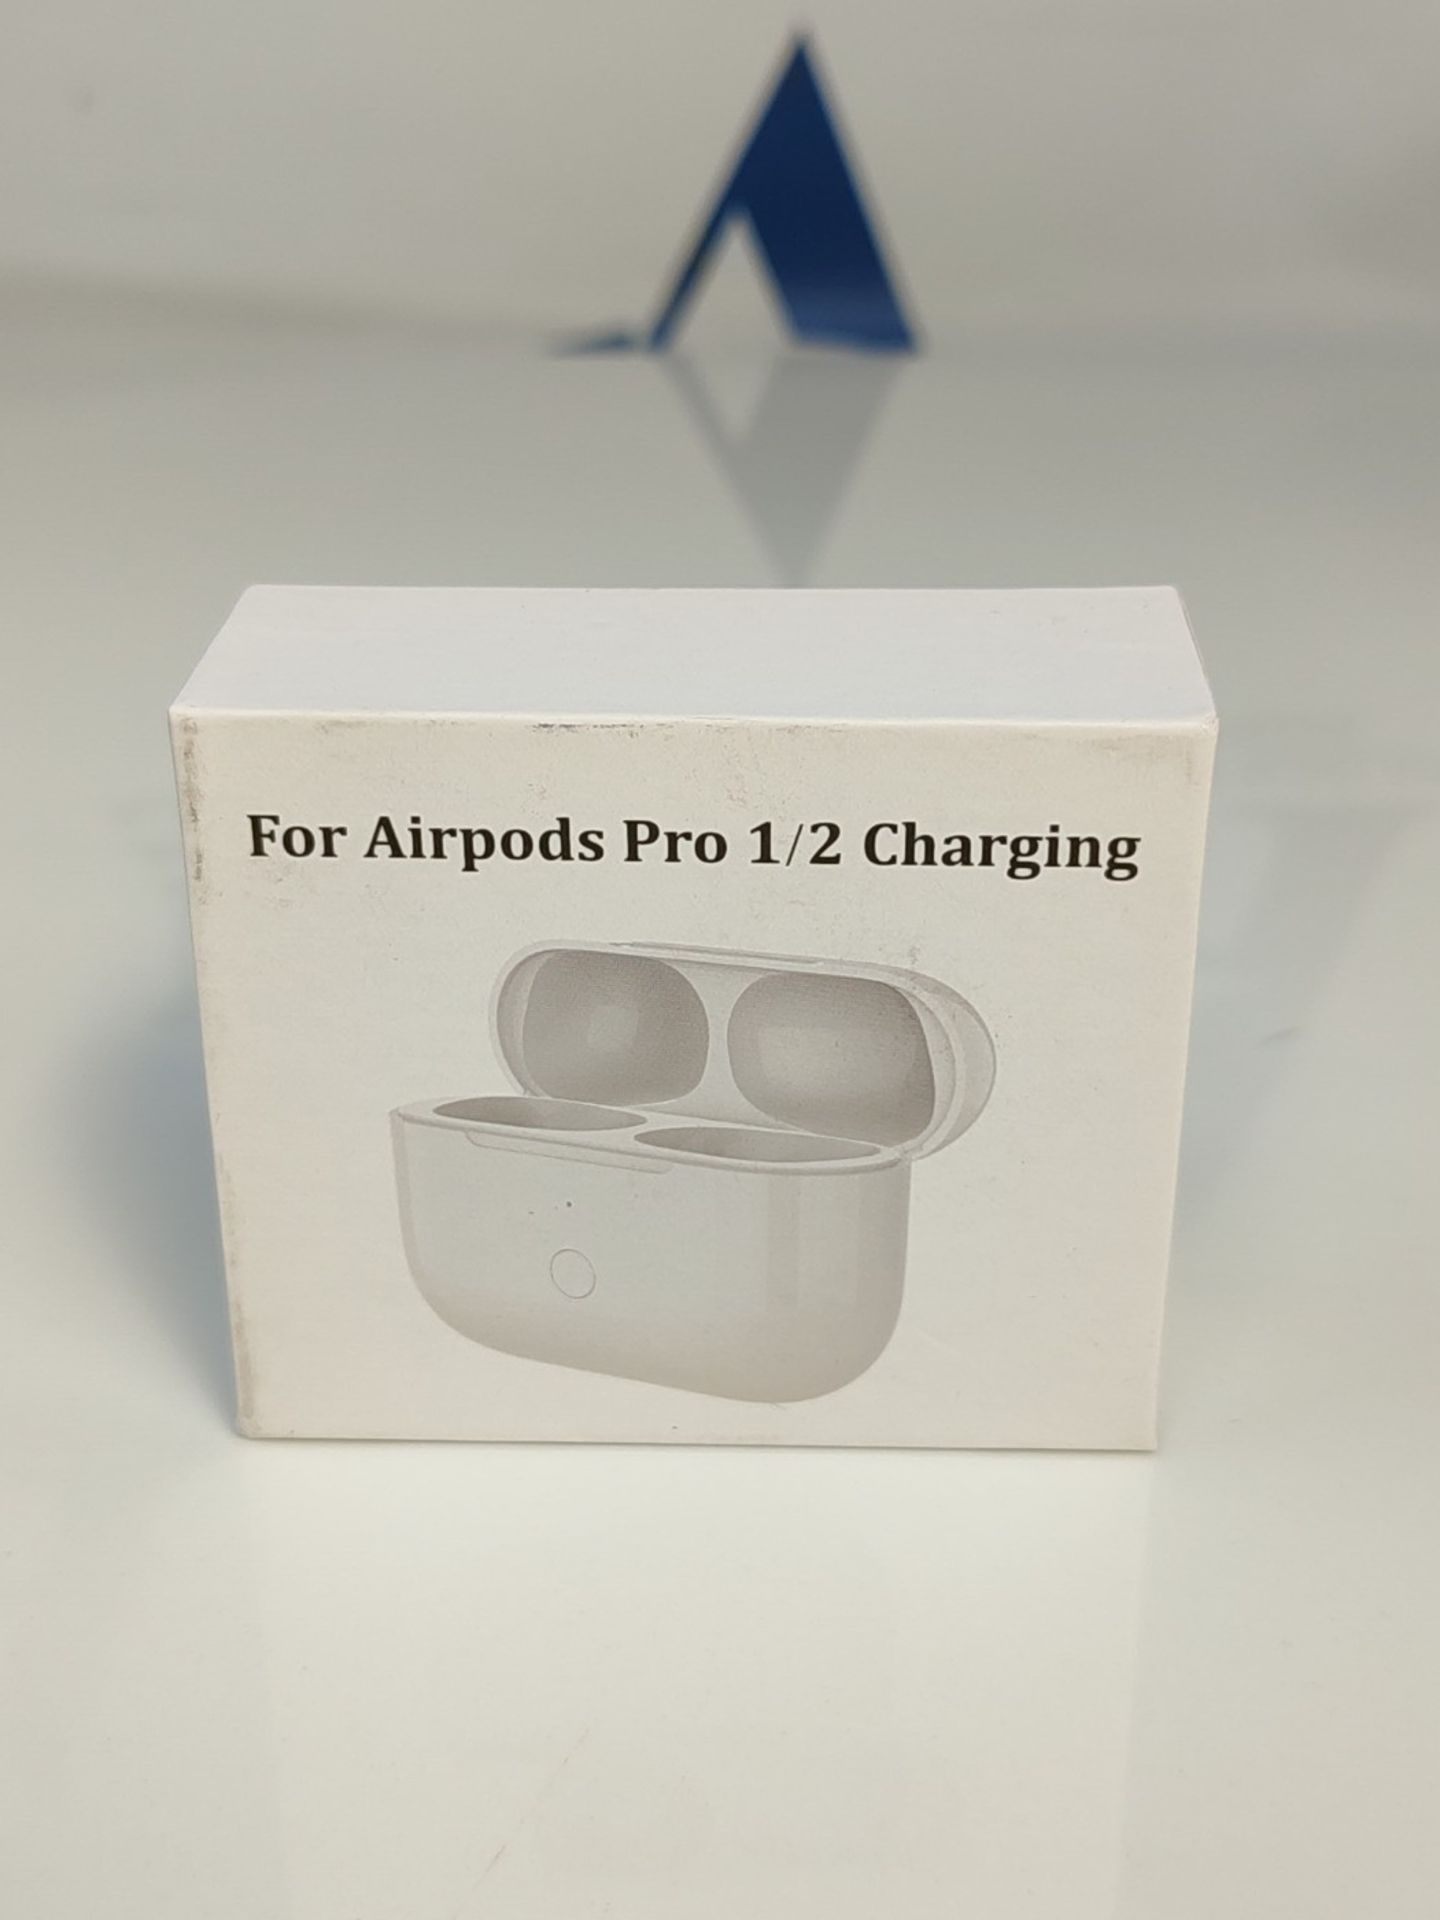 Wireless Charging Case for AirPods Pro 1 and AirPods Pro 2, Replacement Charging Case - Image 5 of 6